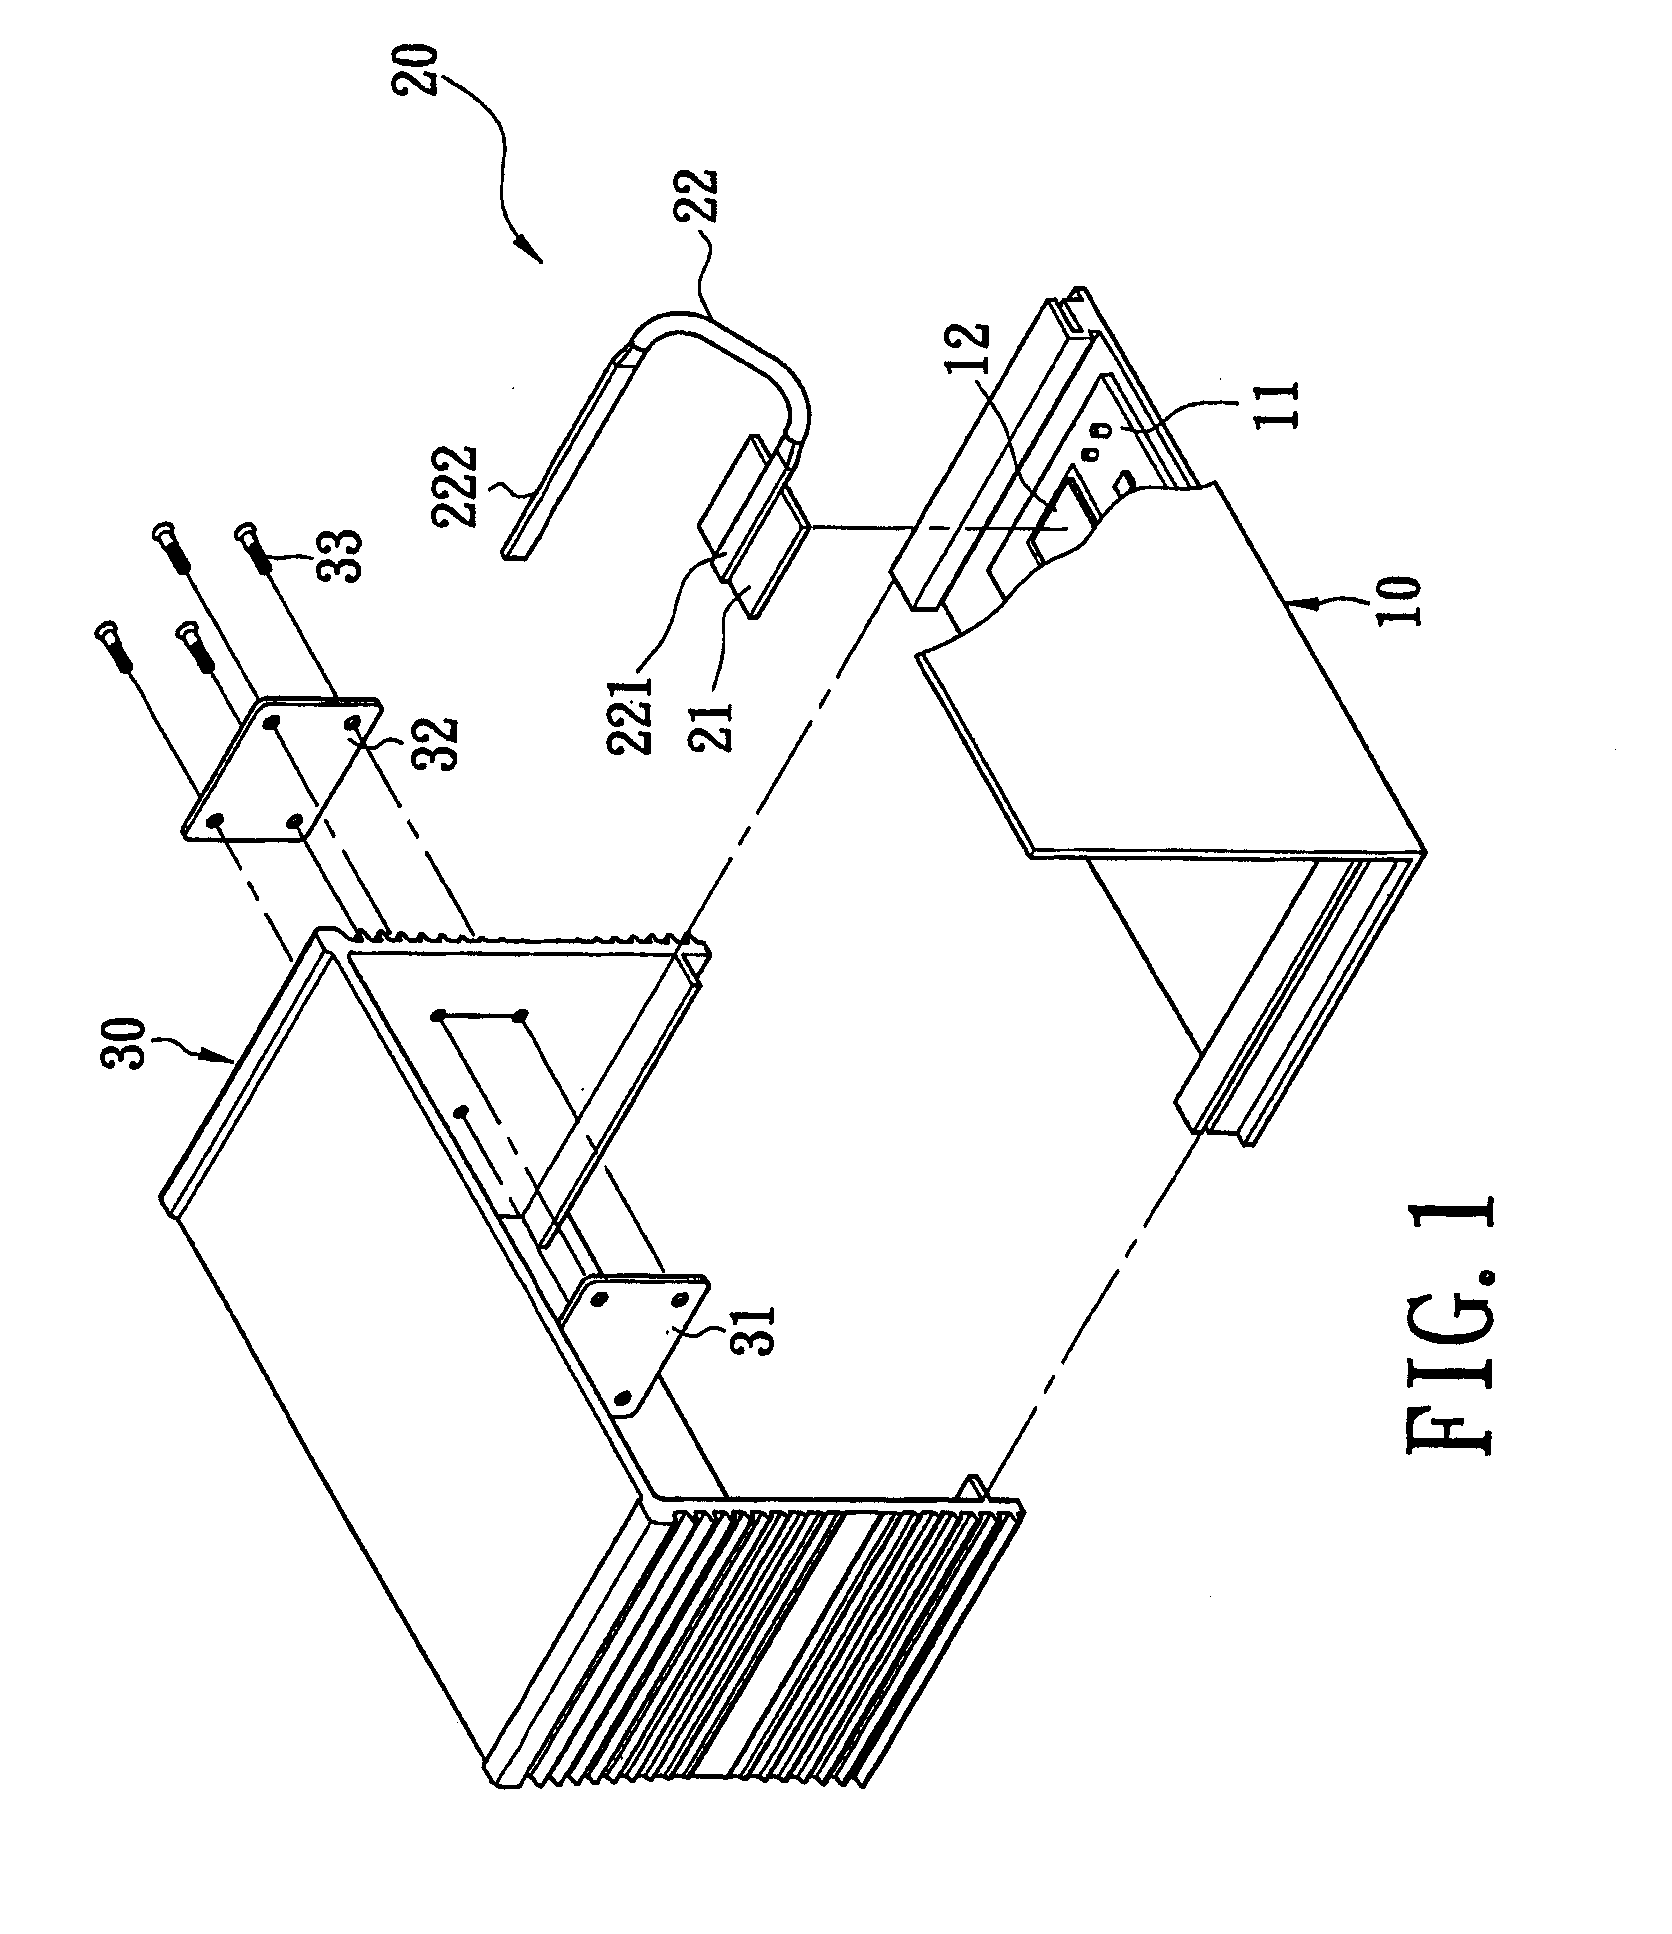 Heat-dissipating casing structure